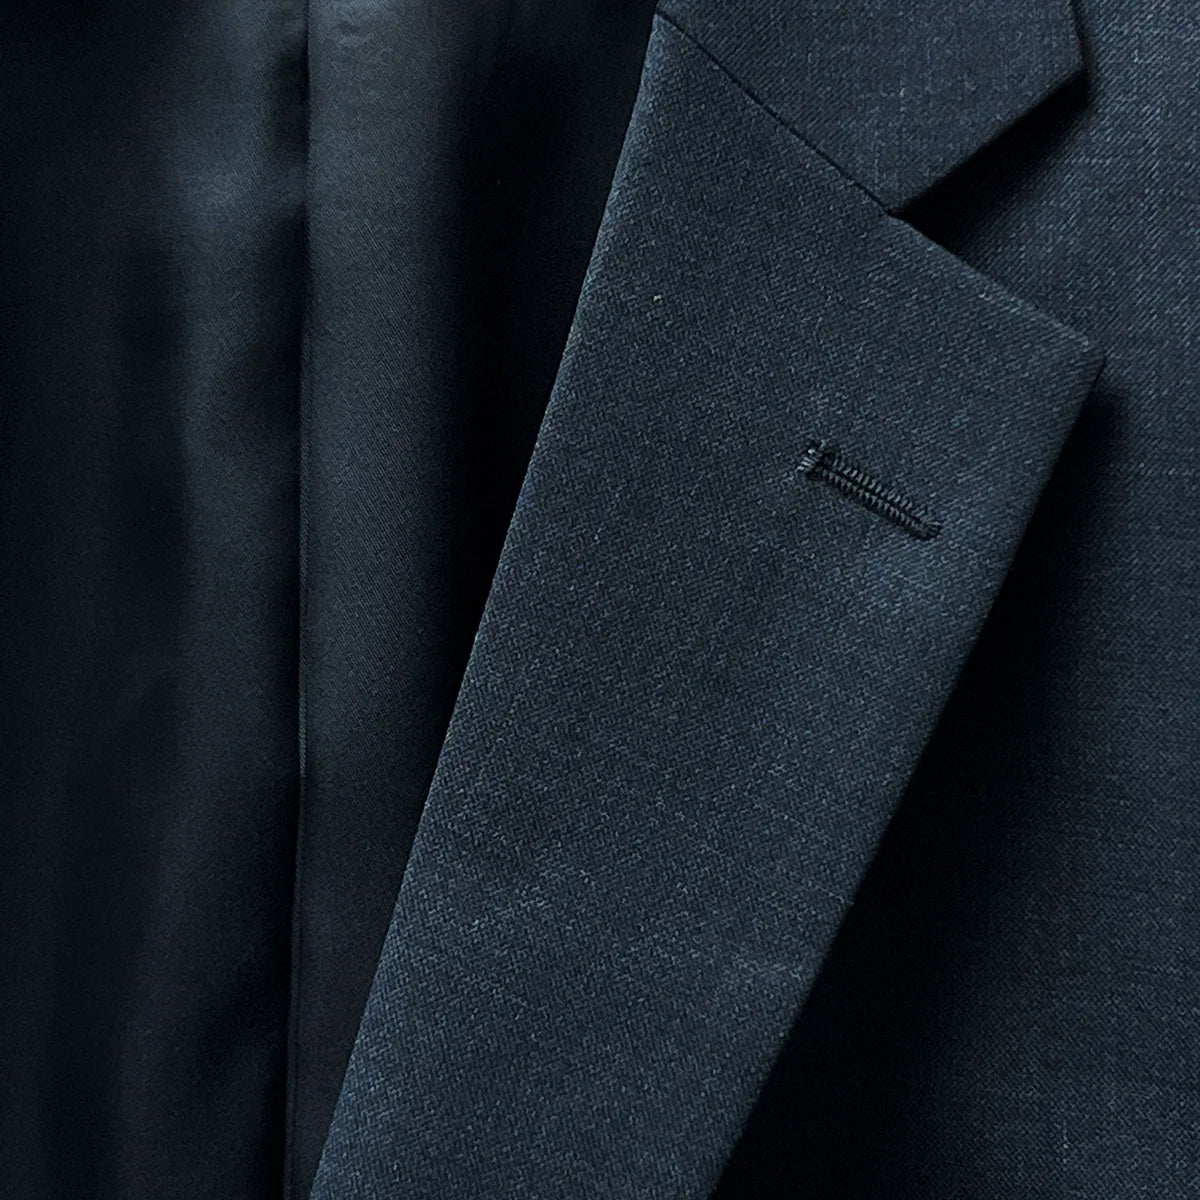 Notch lapel presenting a classic silhouette on a dark gray sharkskin suit.